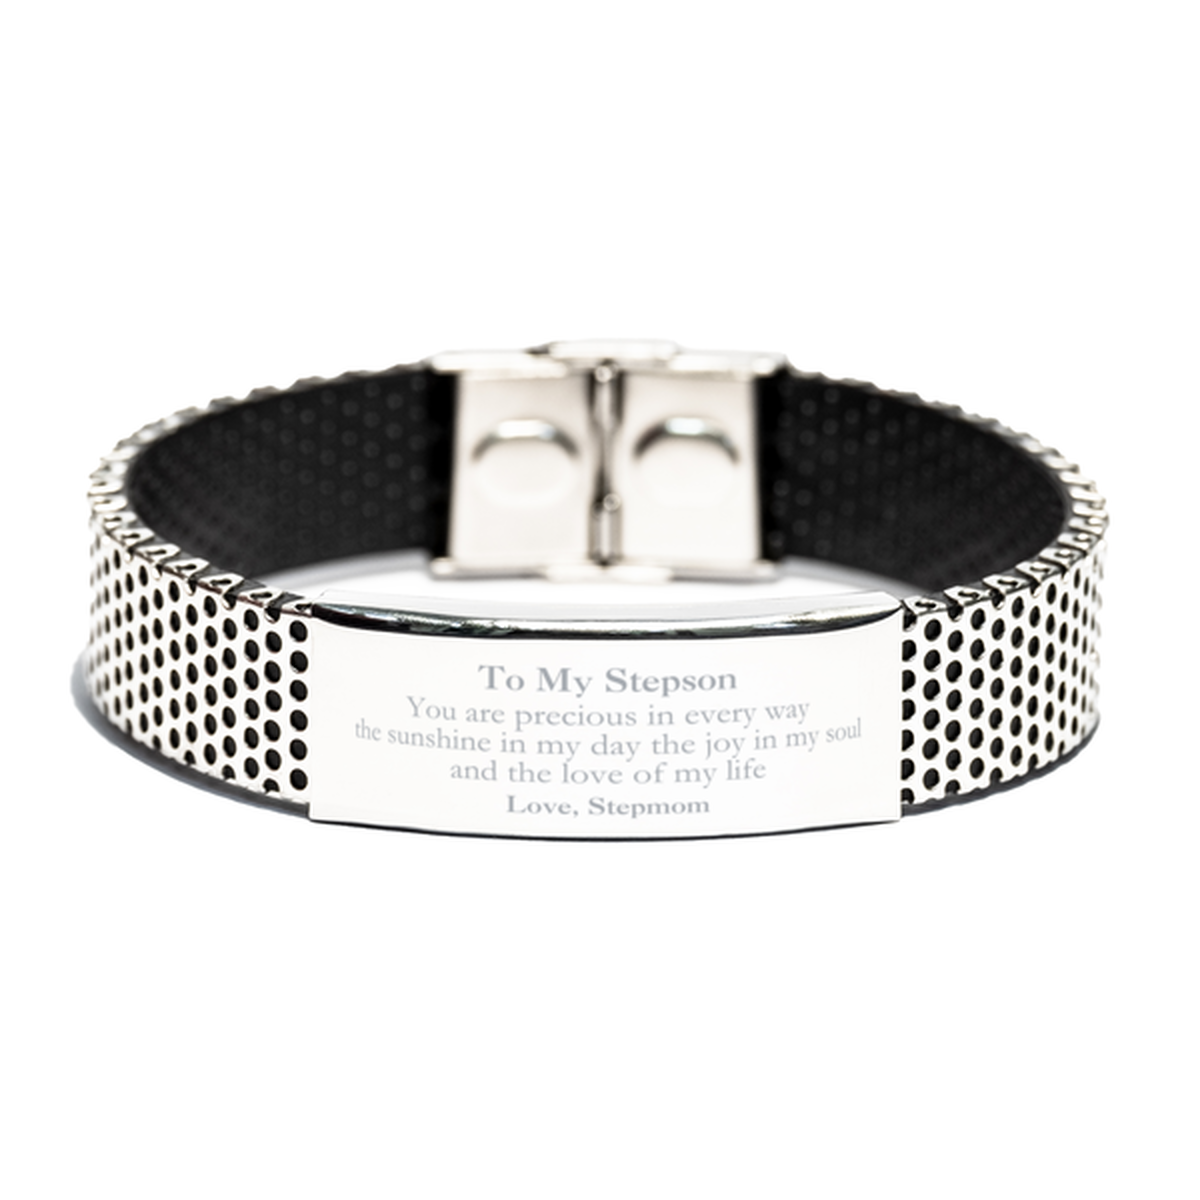 Graduation Gifts for Stepson Stainless Steel Bracelet Present from Stepmom, Christmas Stepson Birthday Gifts Stepson You are precious in every way the sunshine in my day. Love, Stepmom